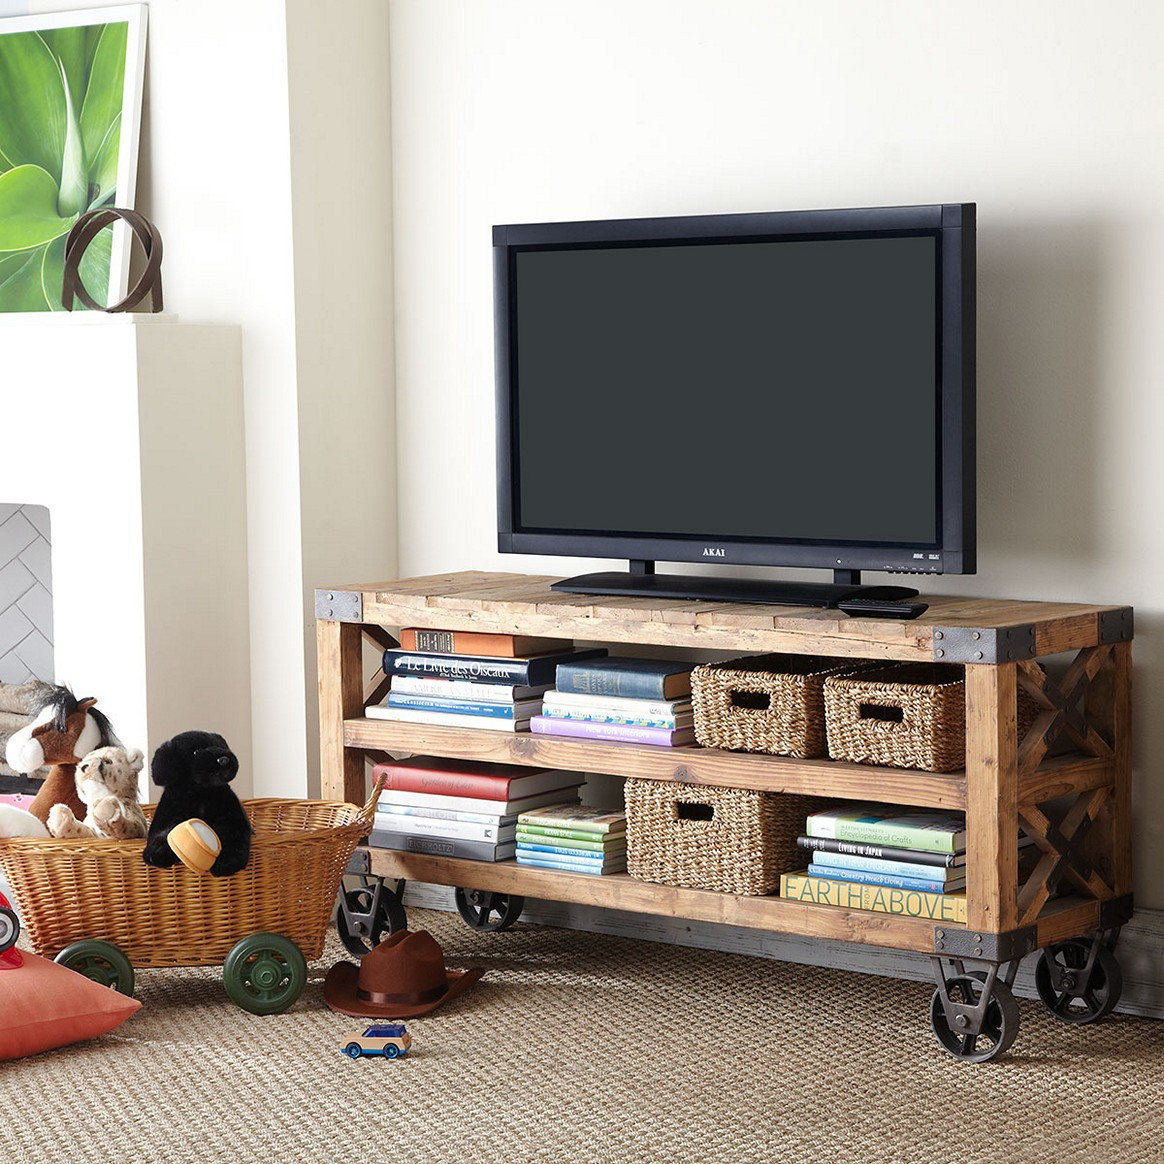 Diy Tv Board
 21 DIY TV Stand Ideas for Your Weekend Home Project